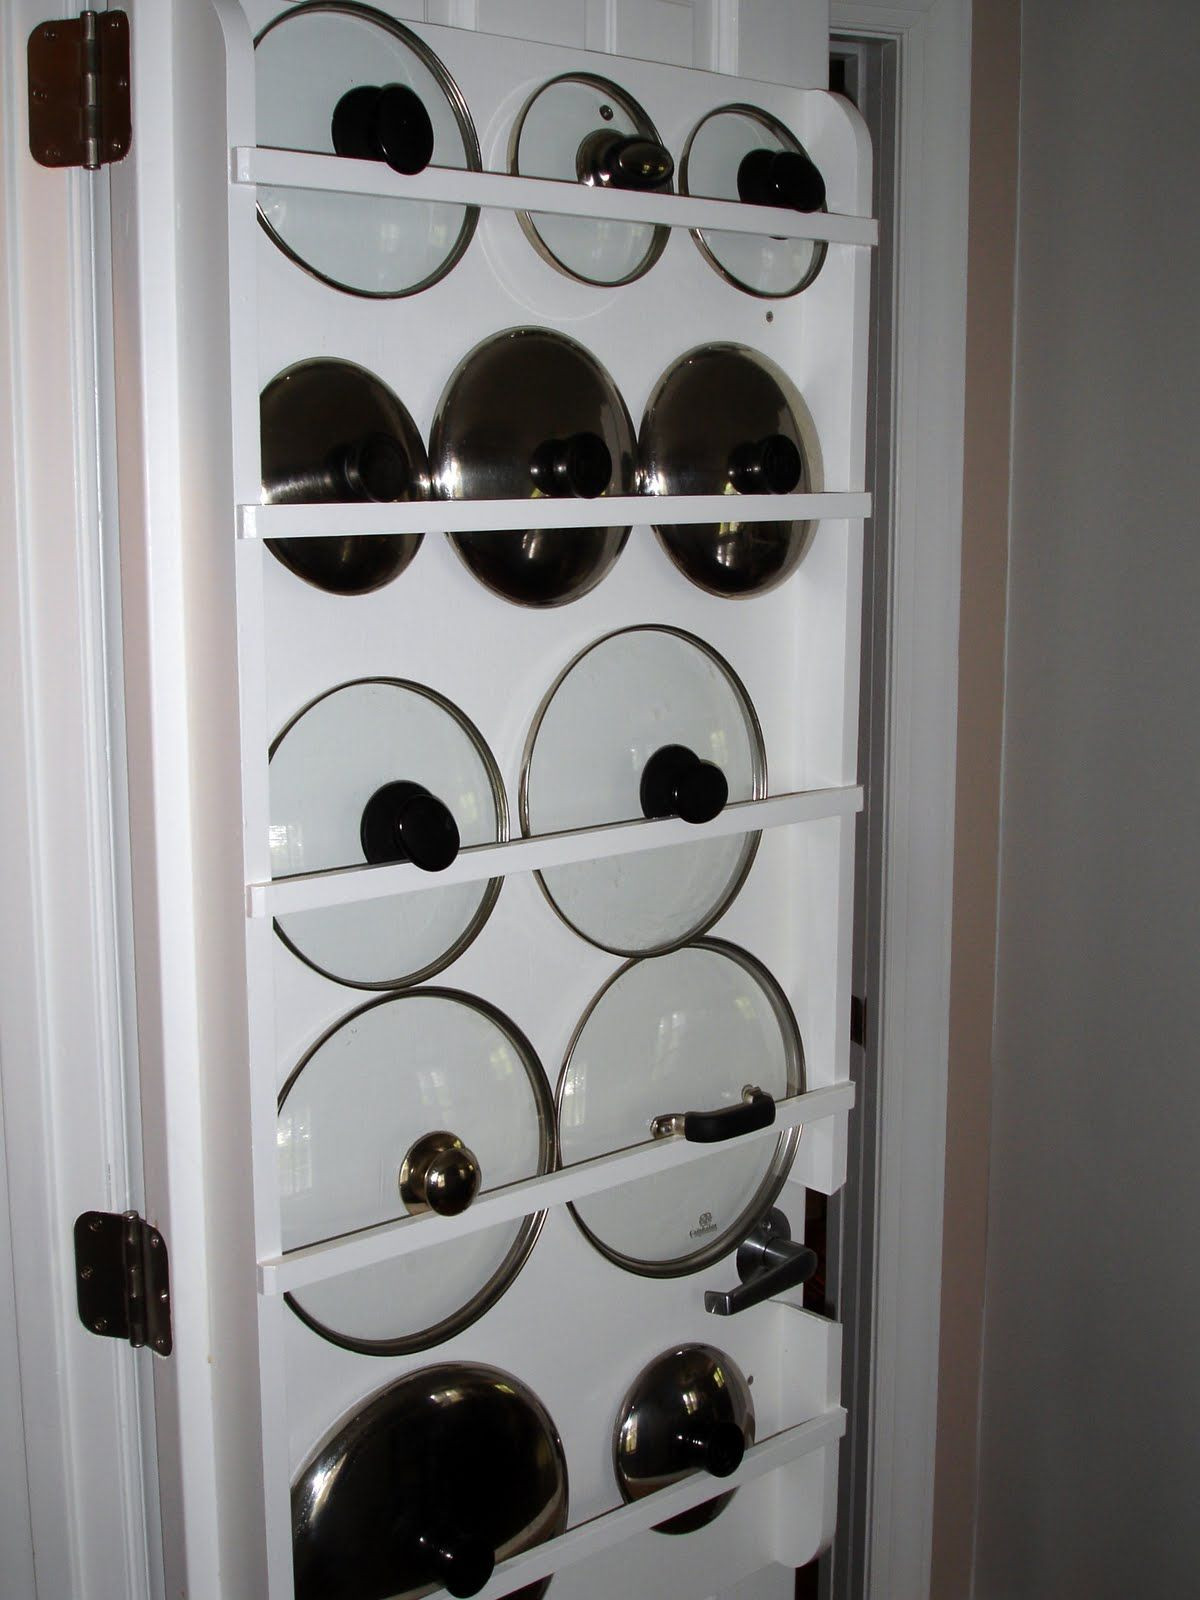 DIY Pot Lid Organizer
 DIY Lid Organizer use curtain rods on the back of pantry